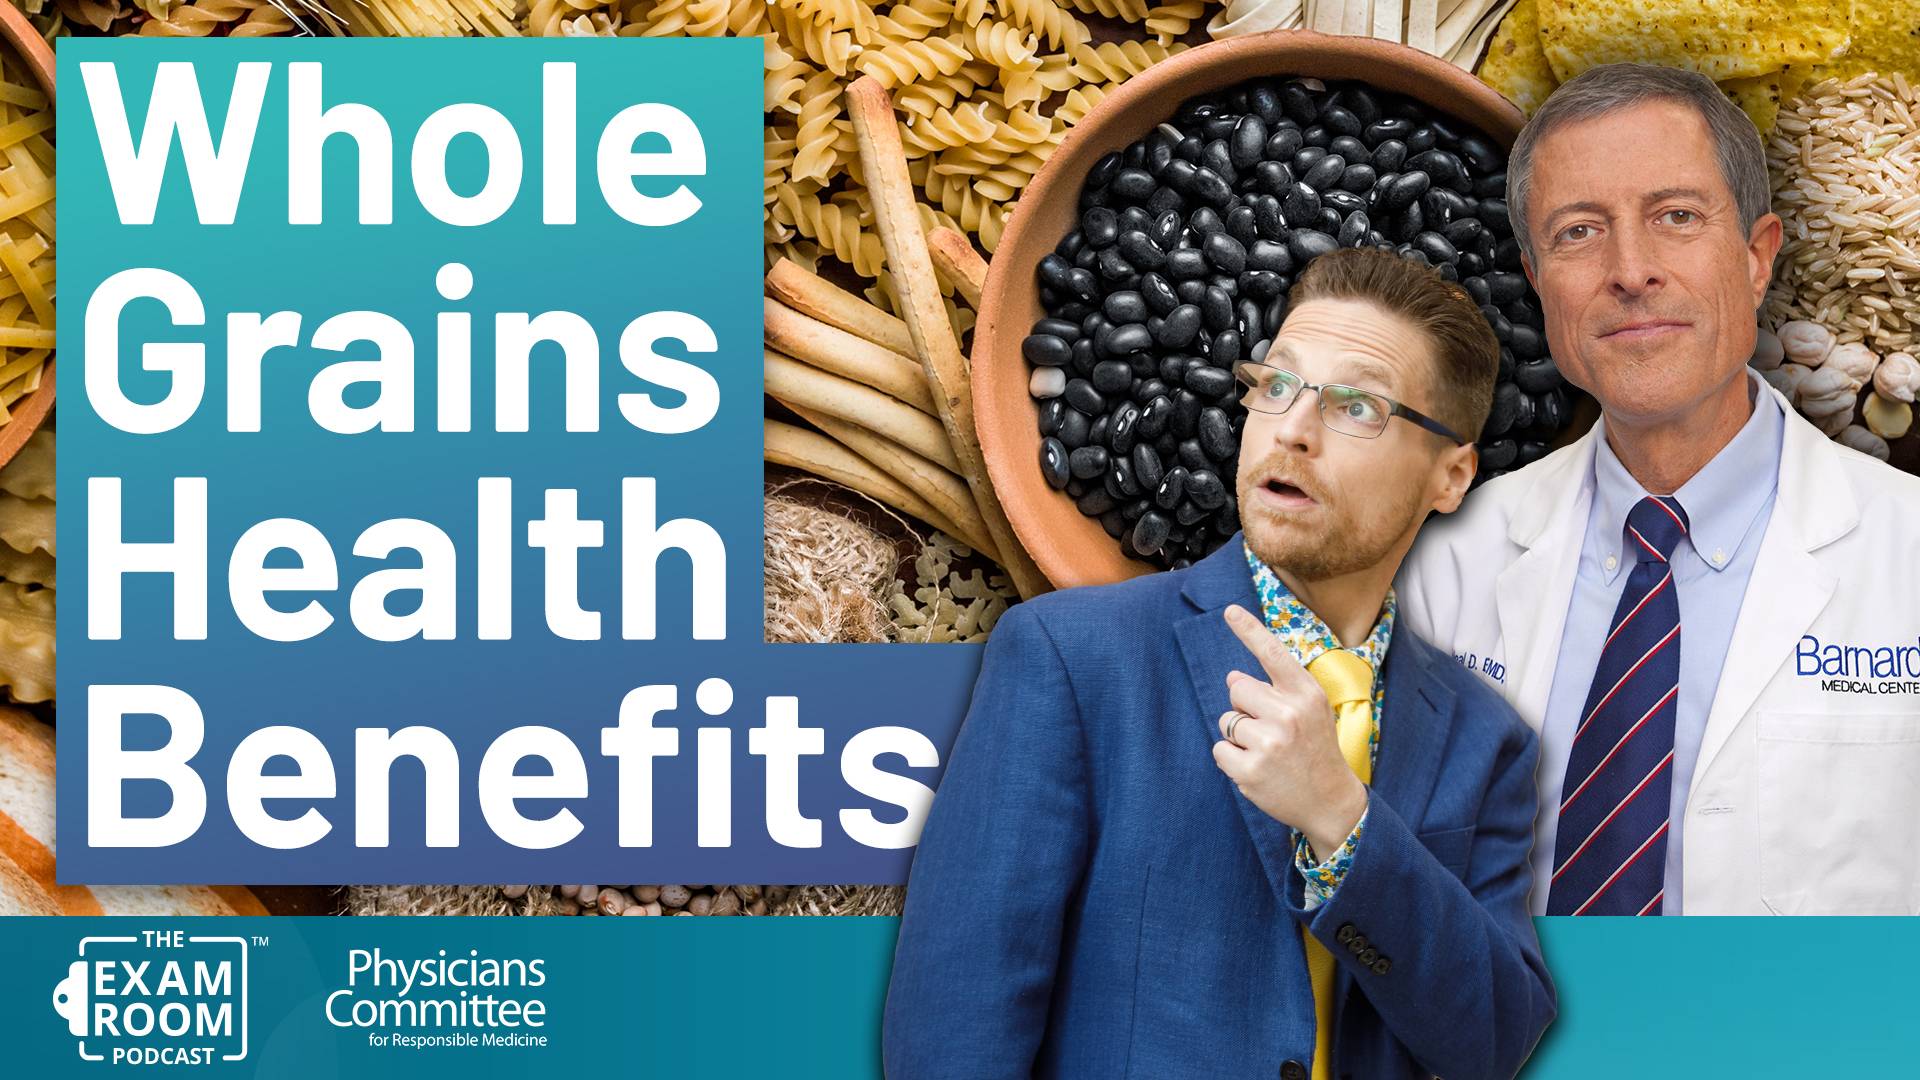 Health Benefits of Whole Grains | Dr. Neal Barnard Live Q&A